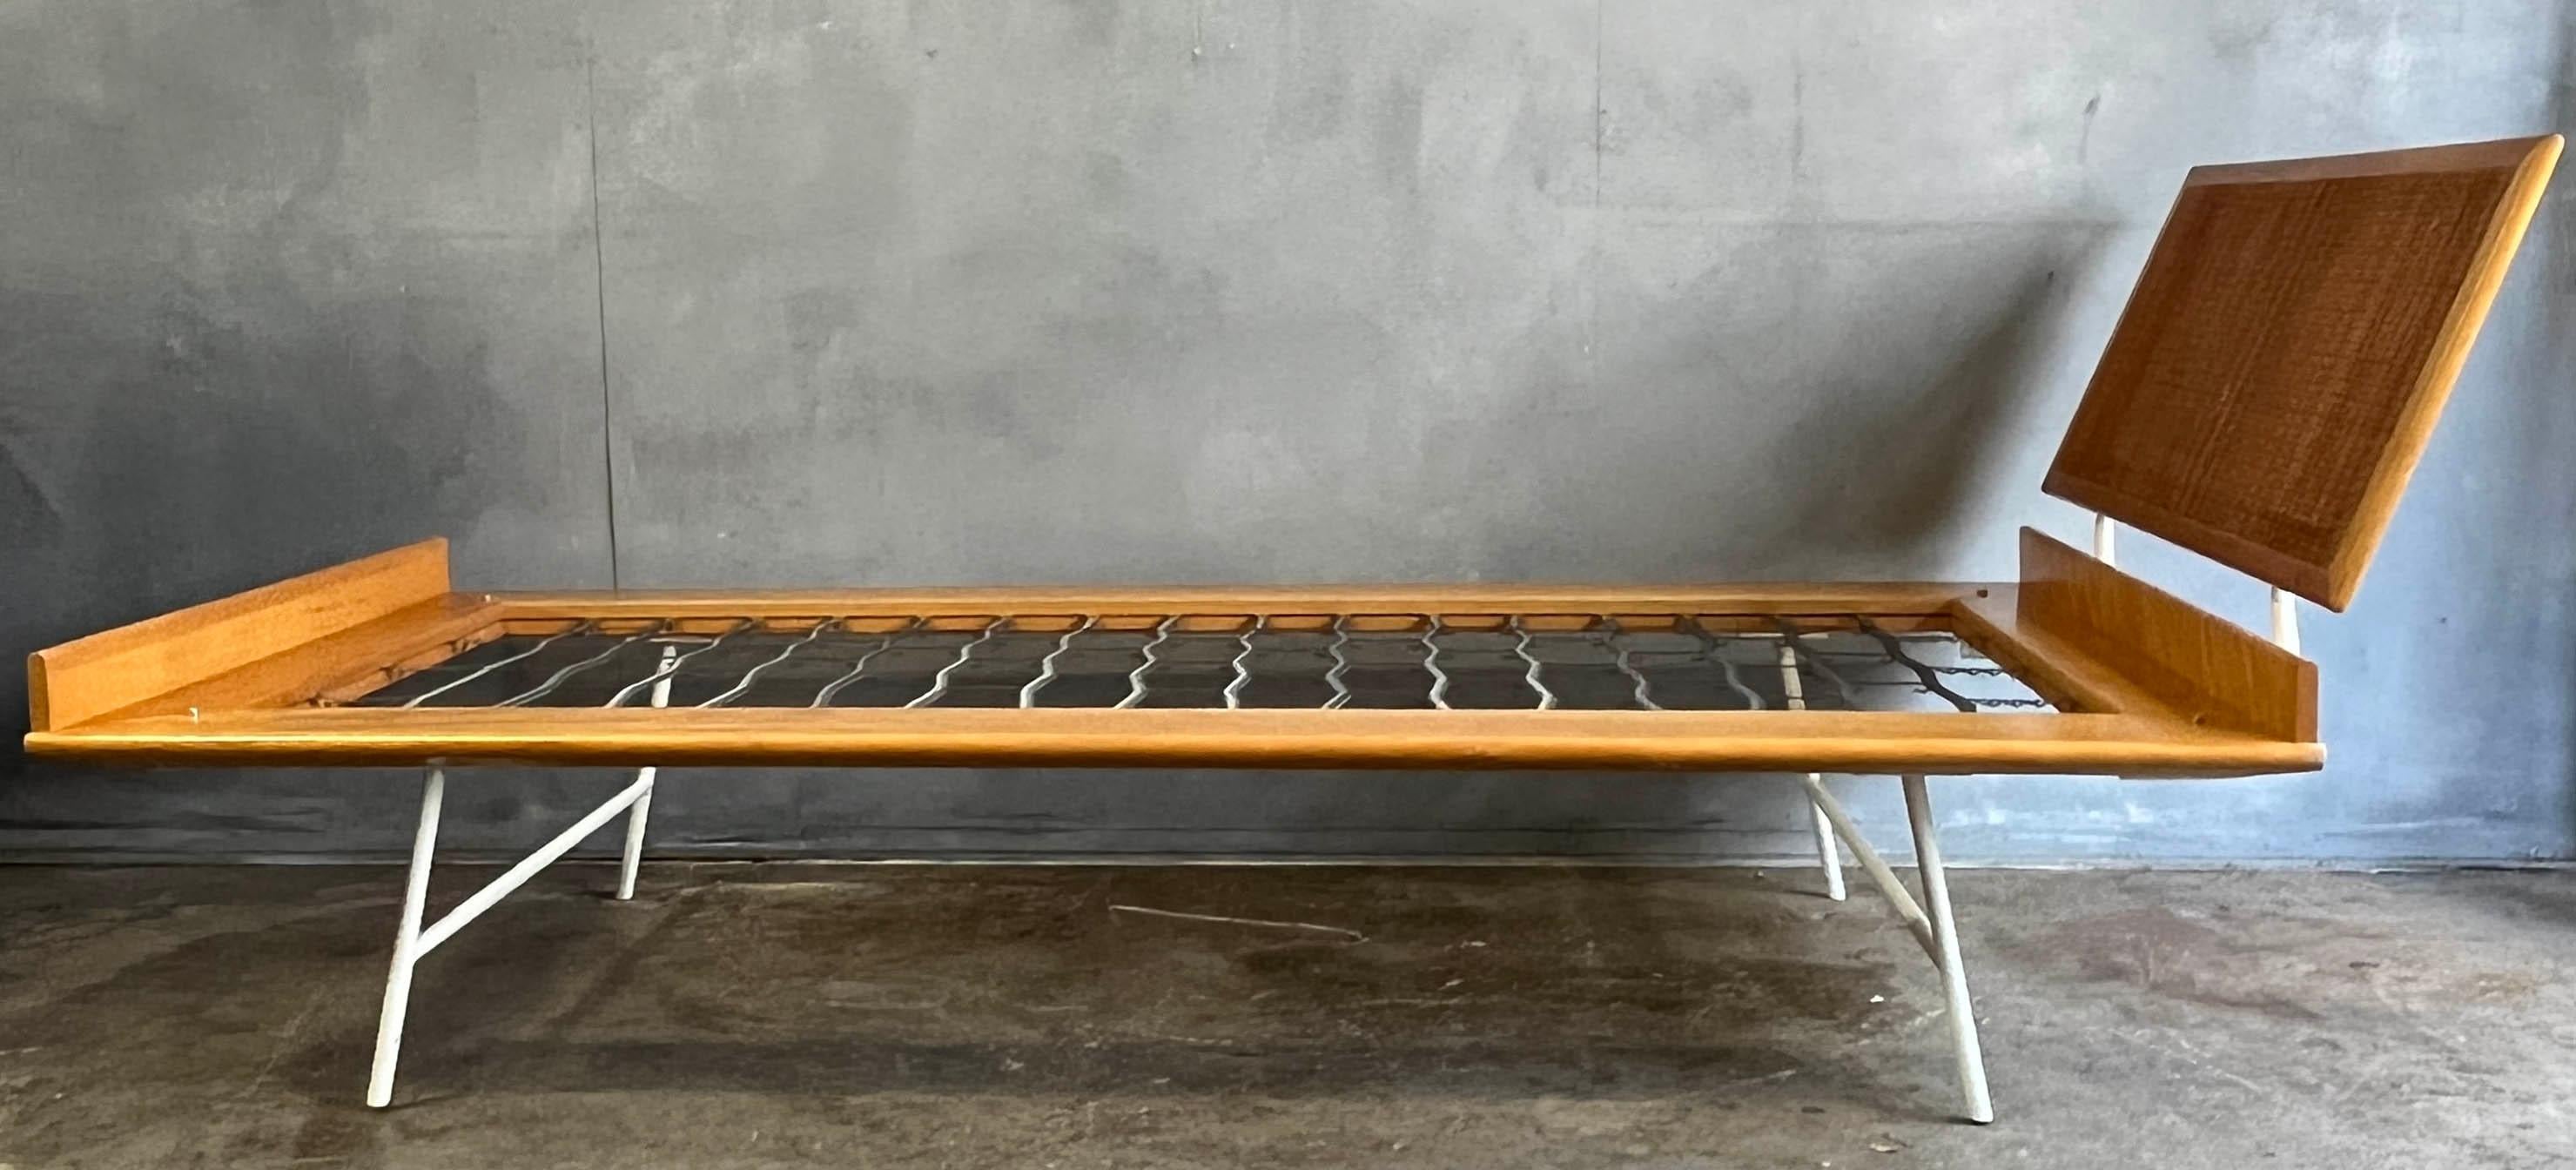 Metal Midcentury Thin Edge Bed by George Nelson for Herman Miller 1950's